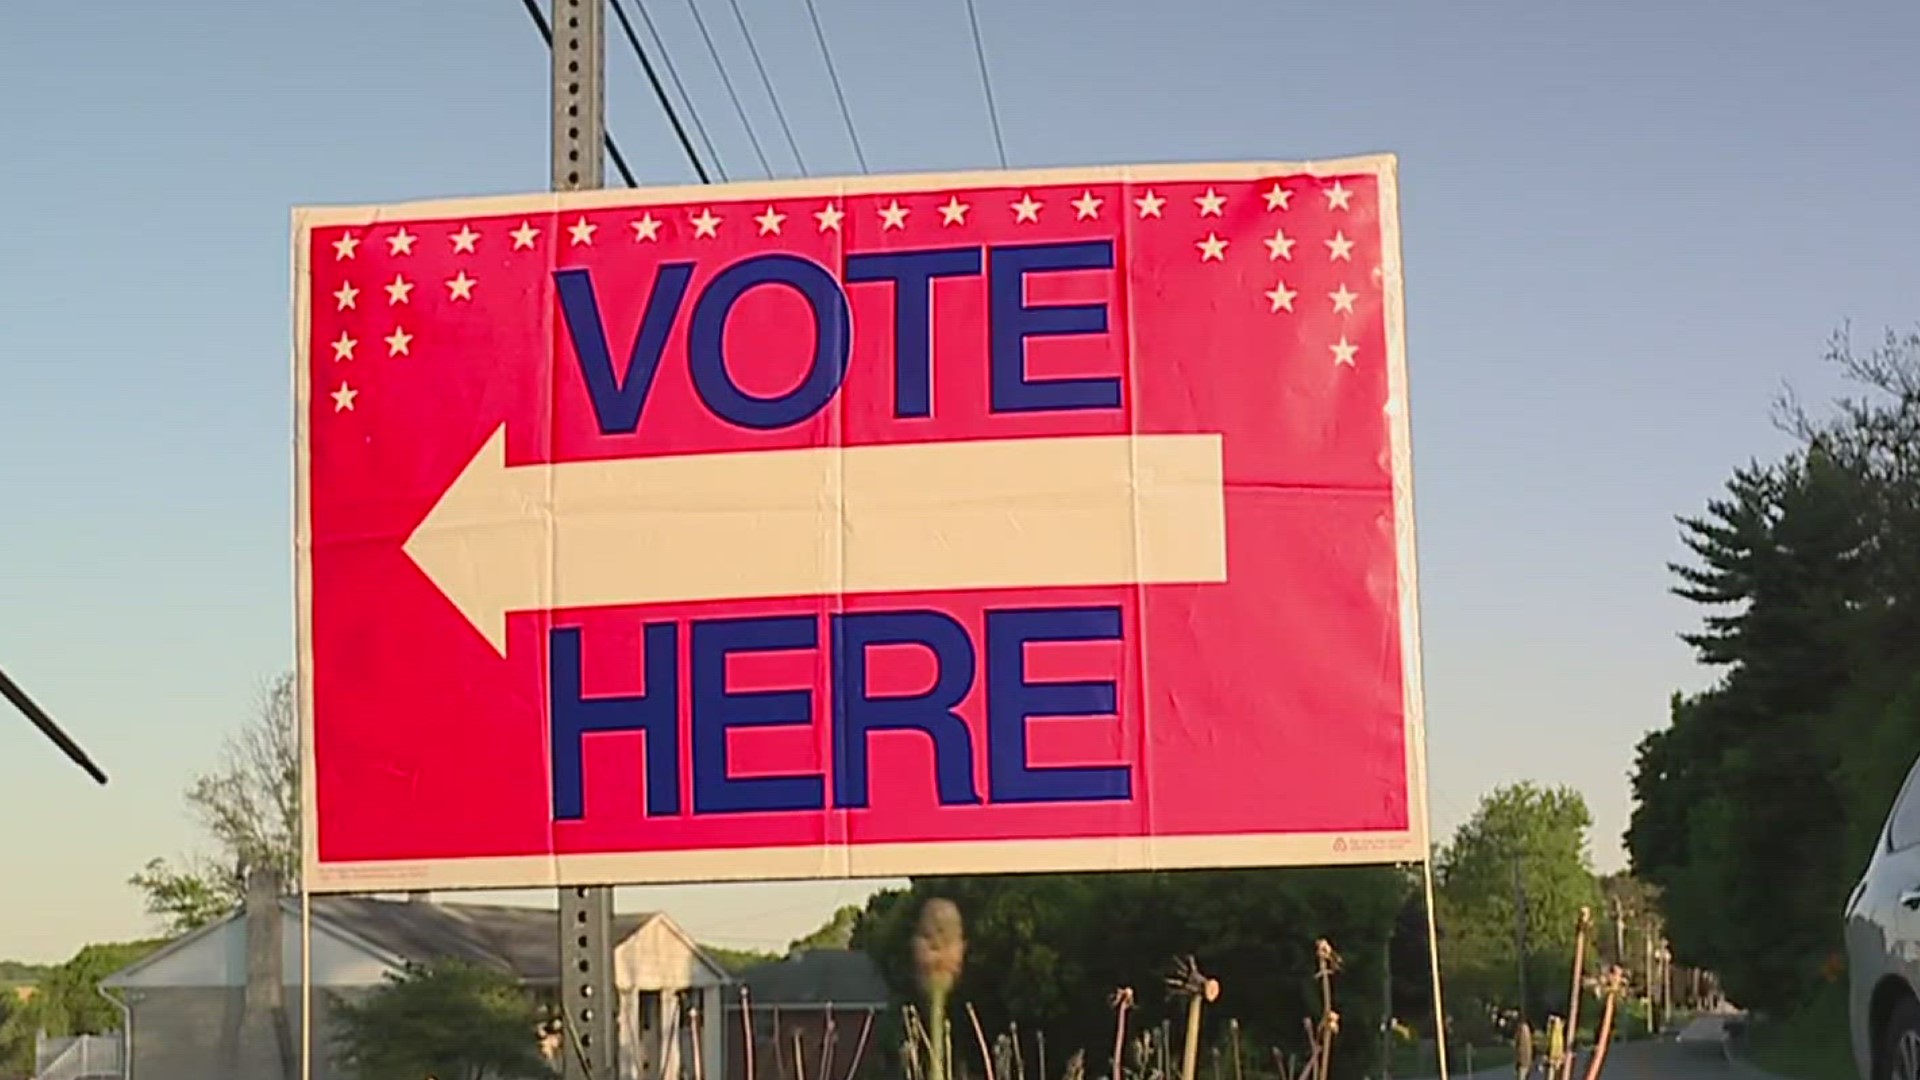 The 2023 Municipal Primary Elections are today, and there are a few things voters should know before heading to cast their vote at the ballot box.